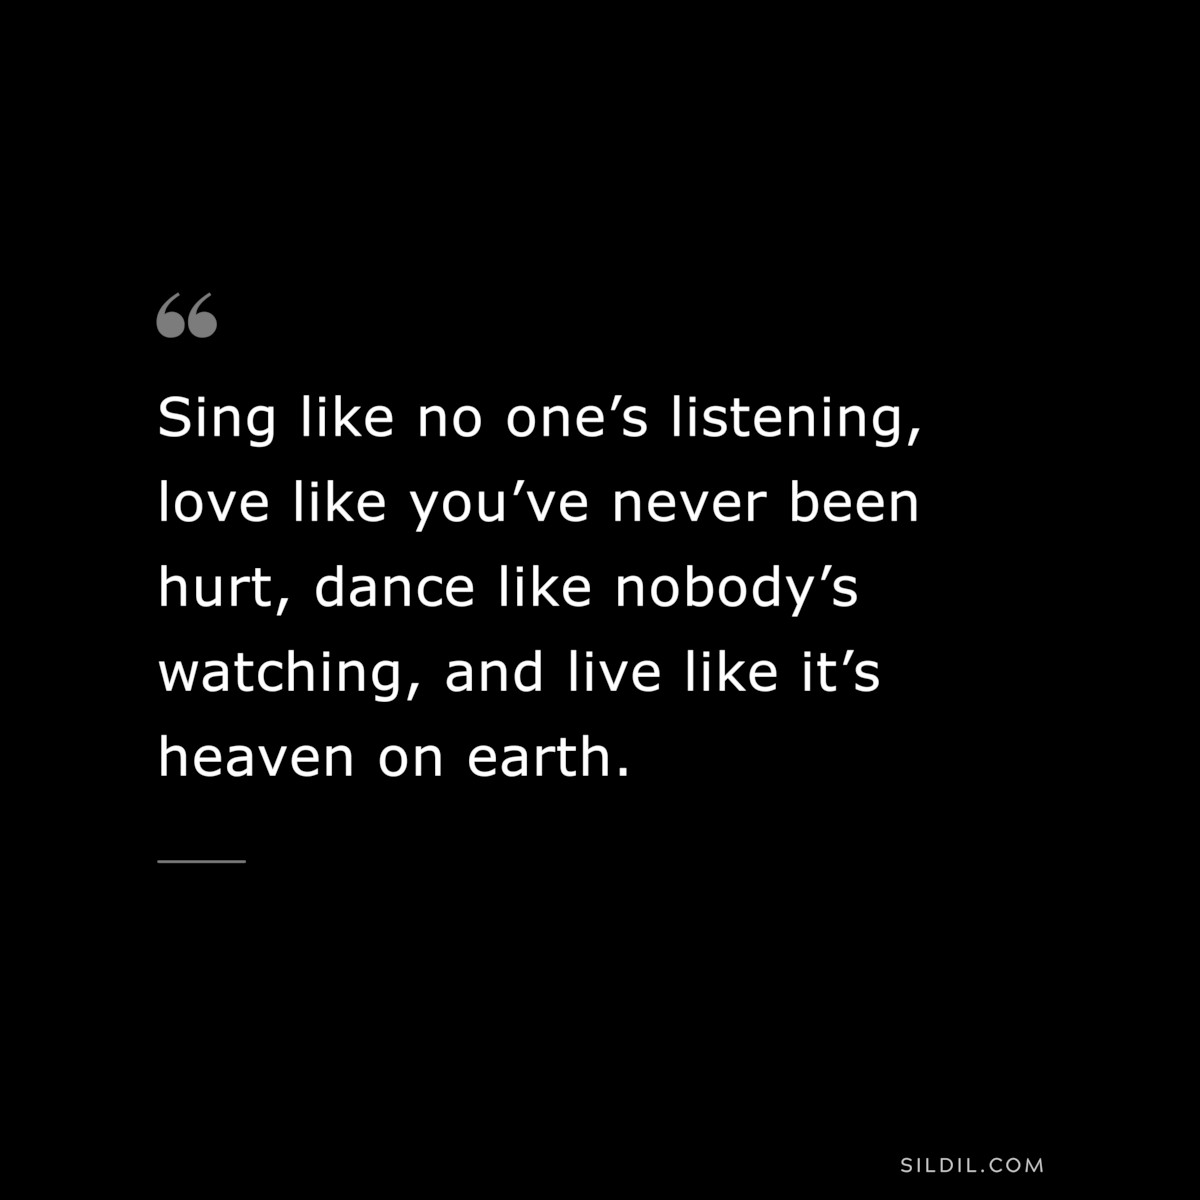 Sing like no one’s listening, love like you’ve never been hurt, dance like nobody’s watching, and live like it’s heaven on earth.